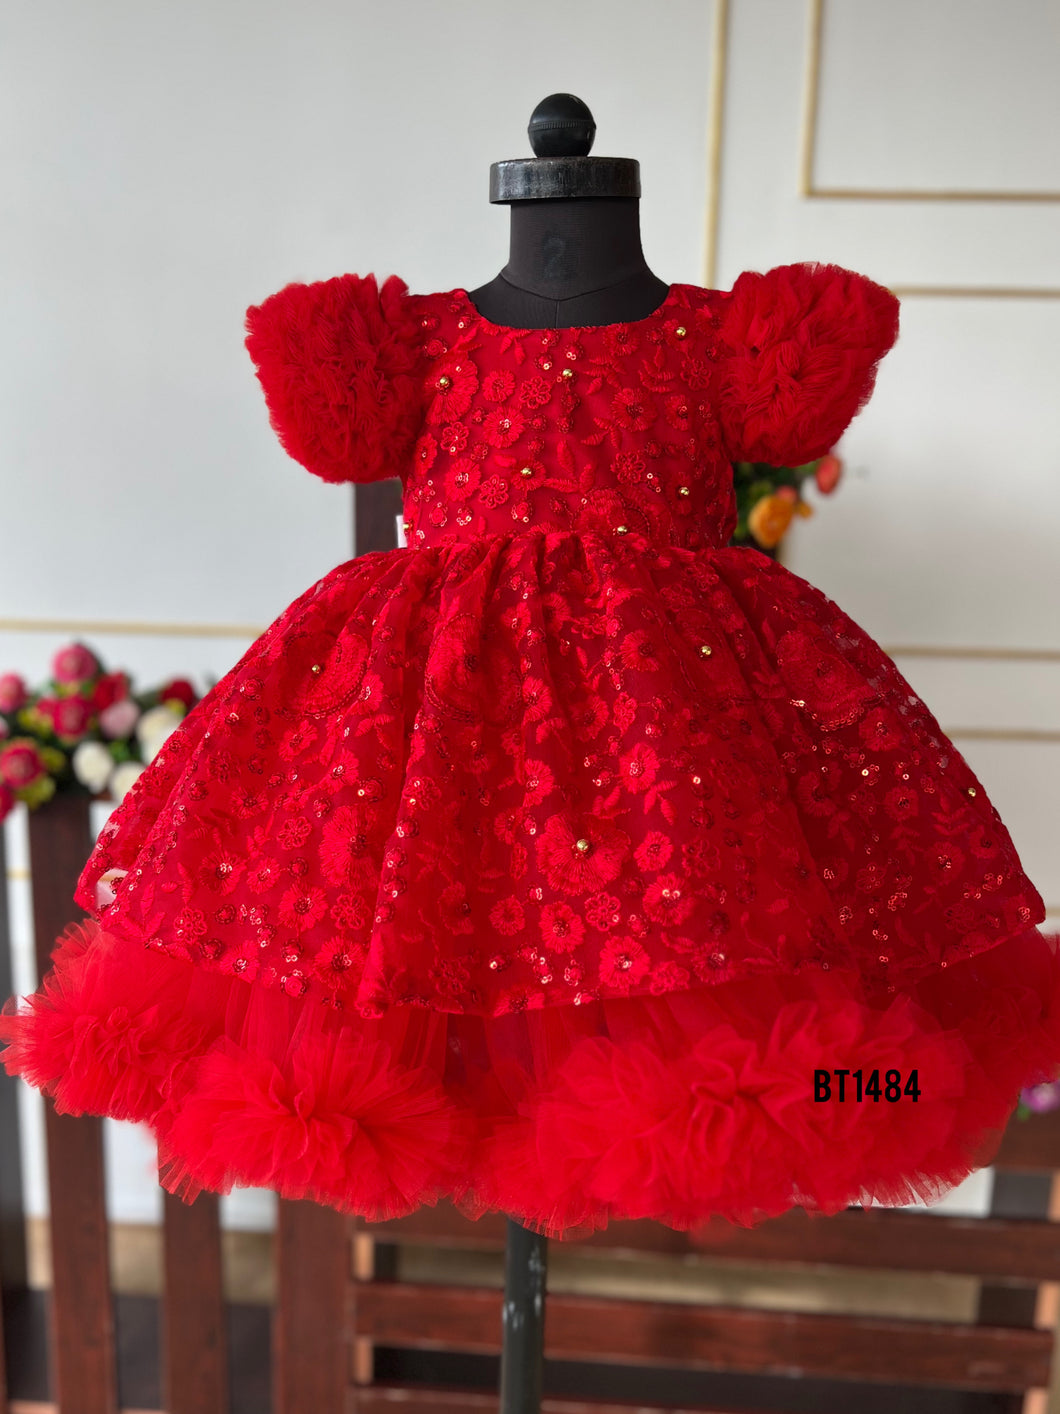 BT1484 Ruby Radiance - Chic Red Blossom Dress for Joyous Celebrations